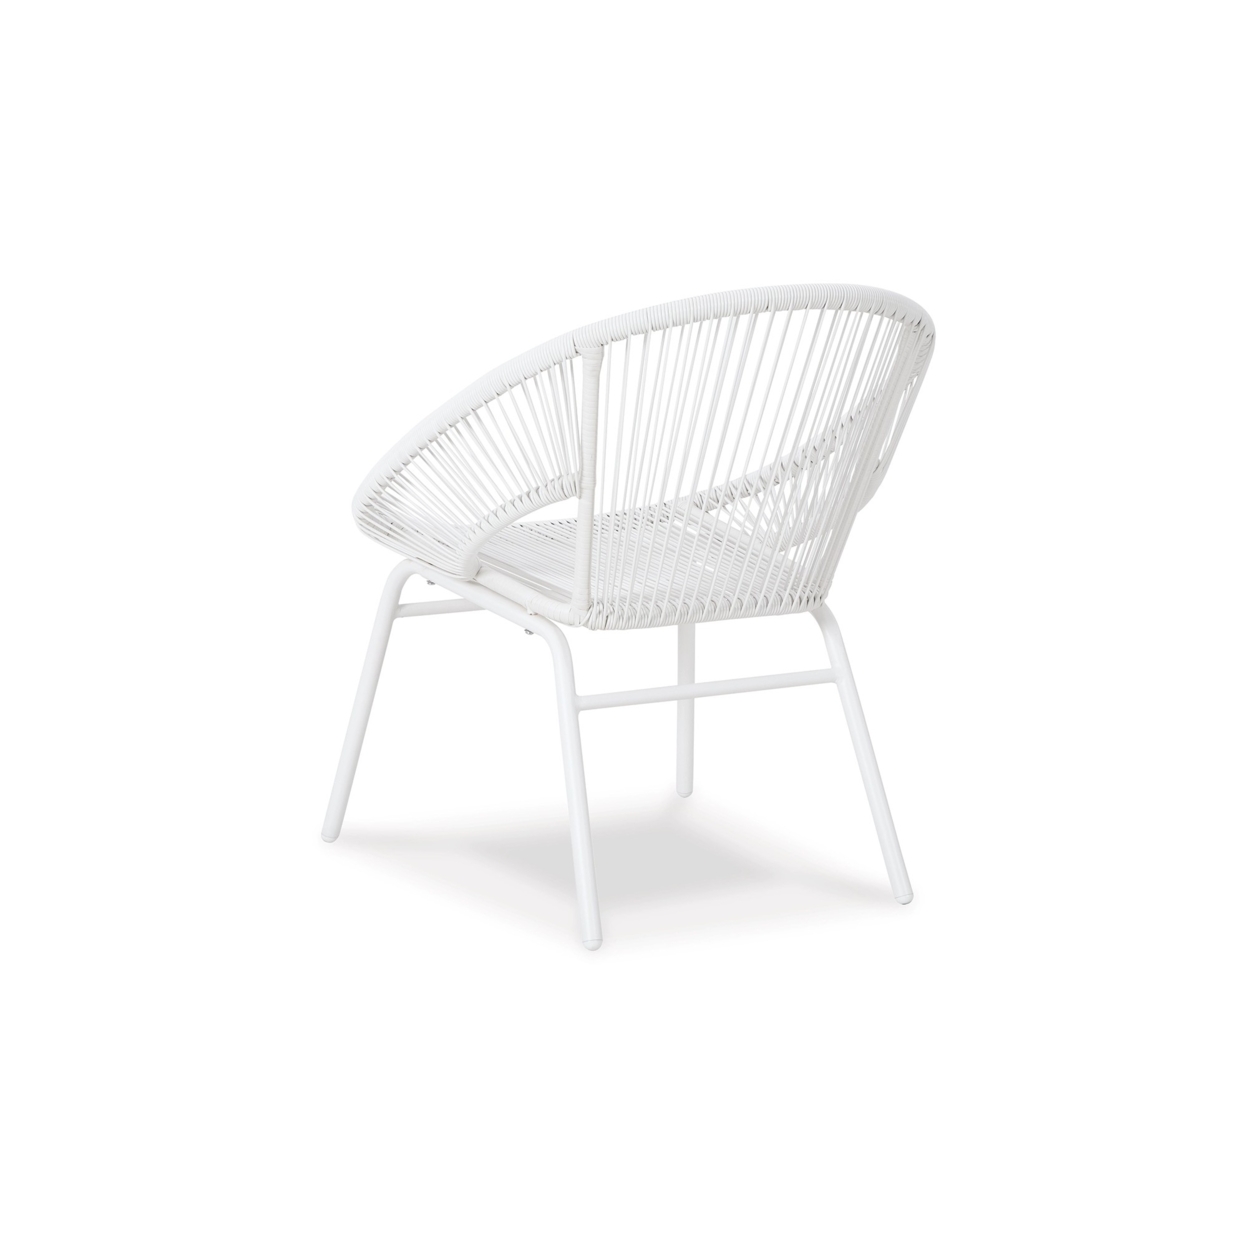 Hely 3 Piece Outdoor Table And Chairs Set, White All Weather Resin Wicker- Saltoro Sherpi